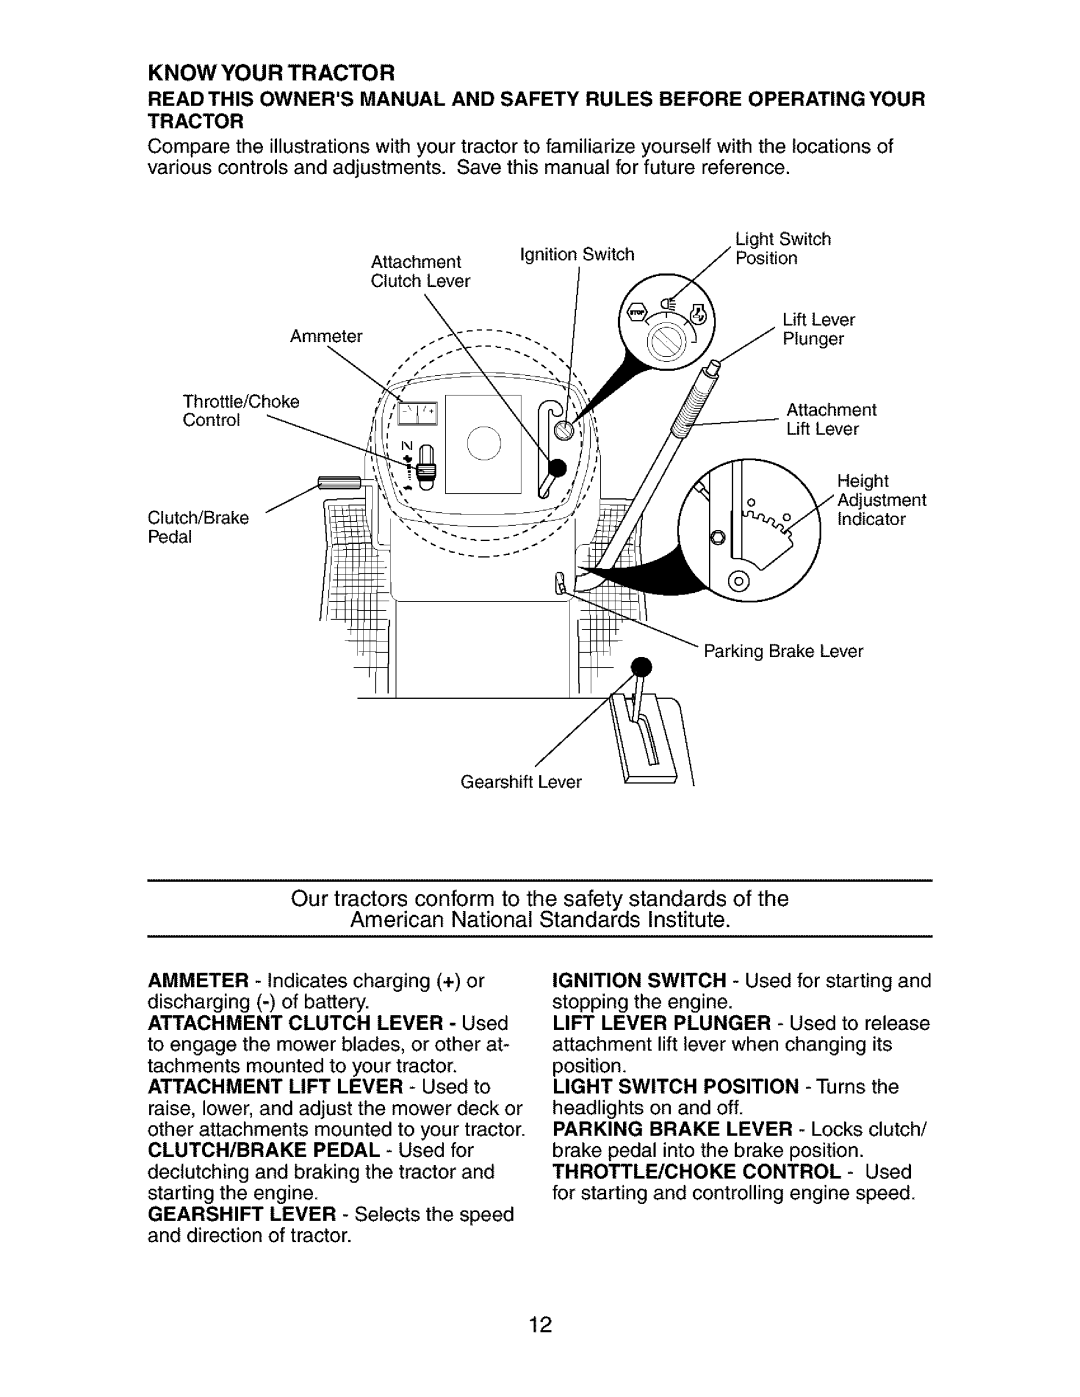 Craftsman 917.273134 owner manual American National Standards Institute, Know Your Tractor, ATTACHMENT CLUTCH LEVER - Used 